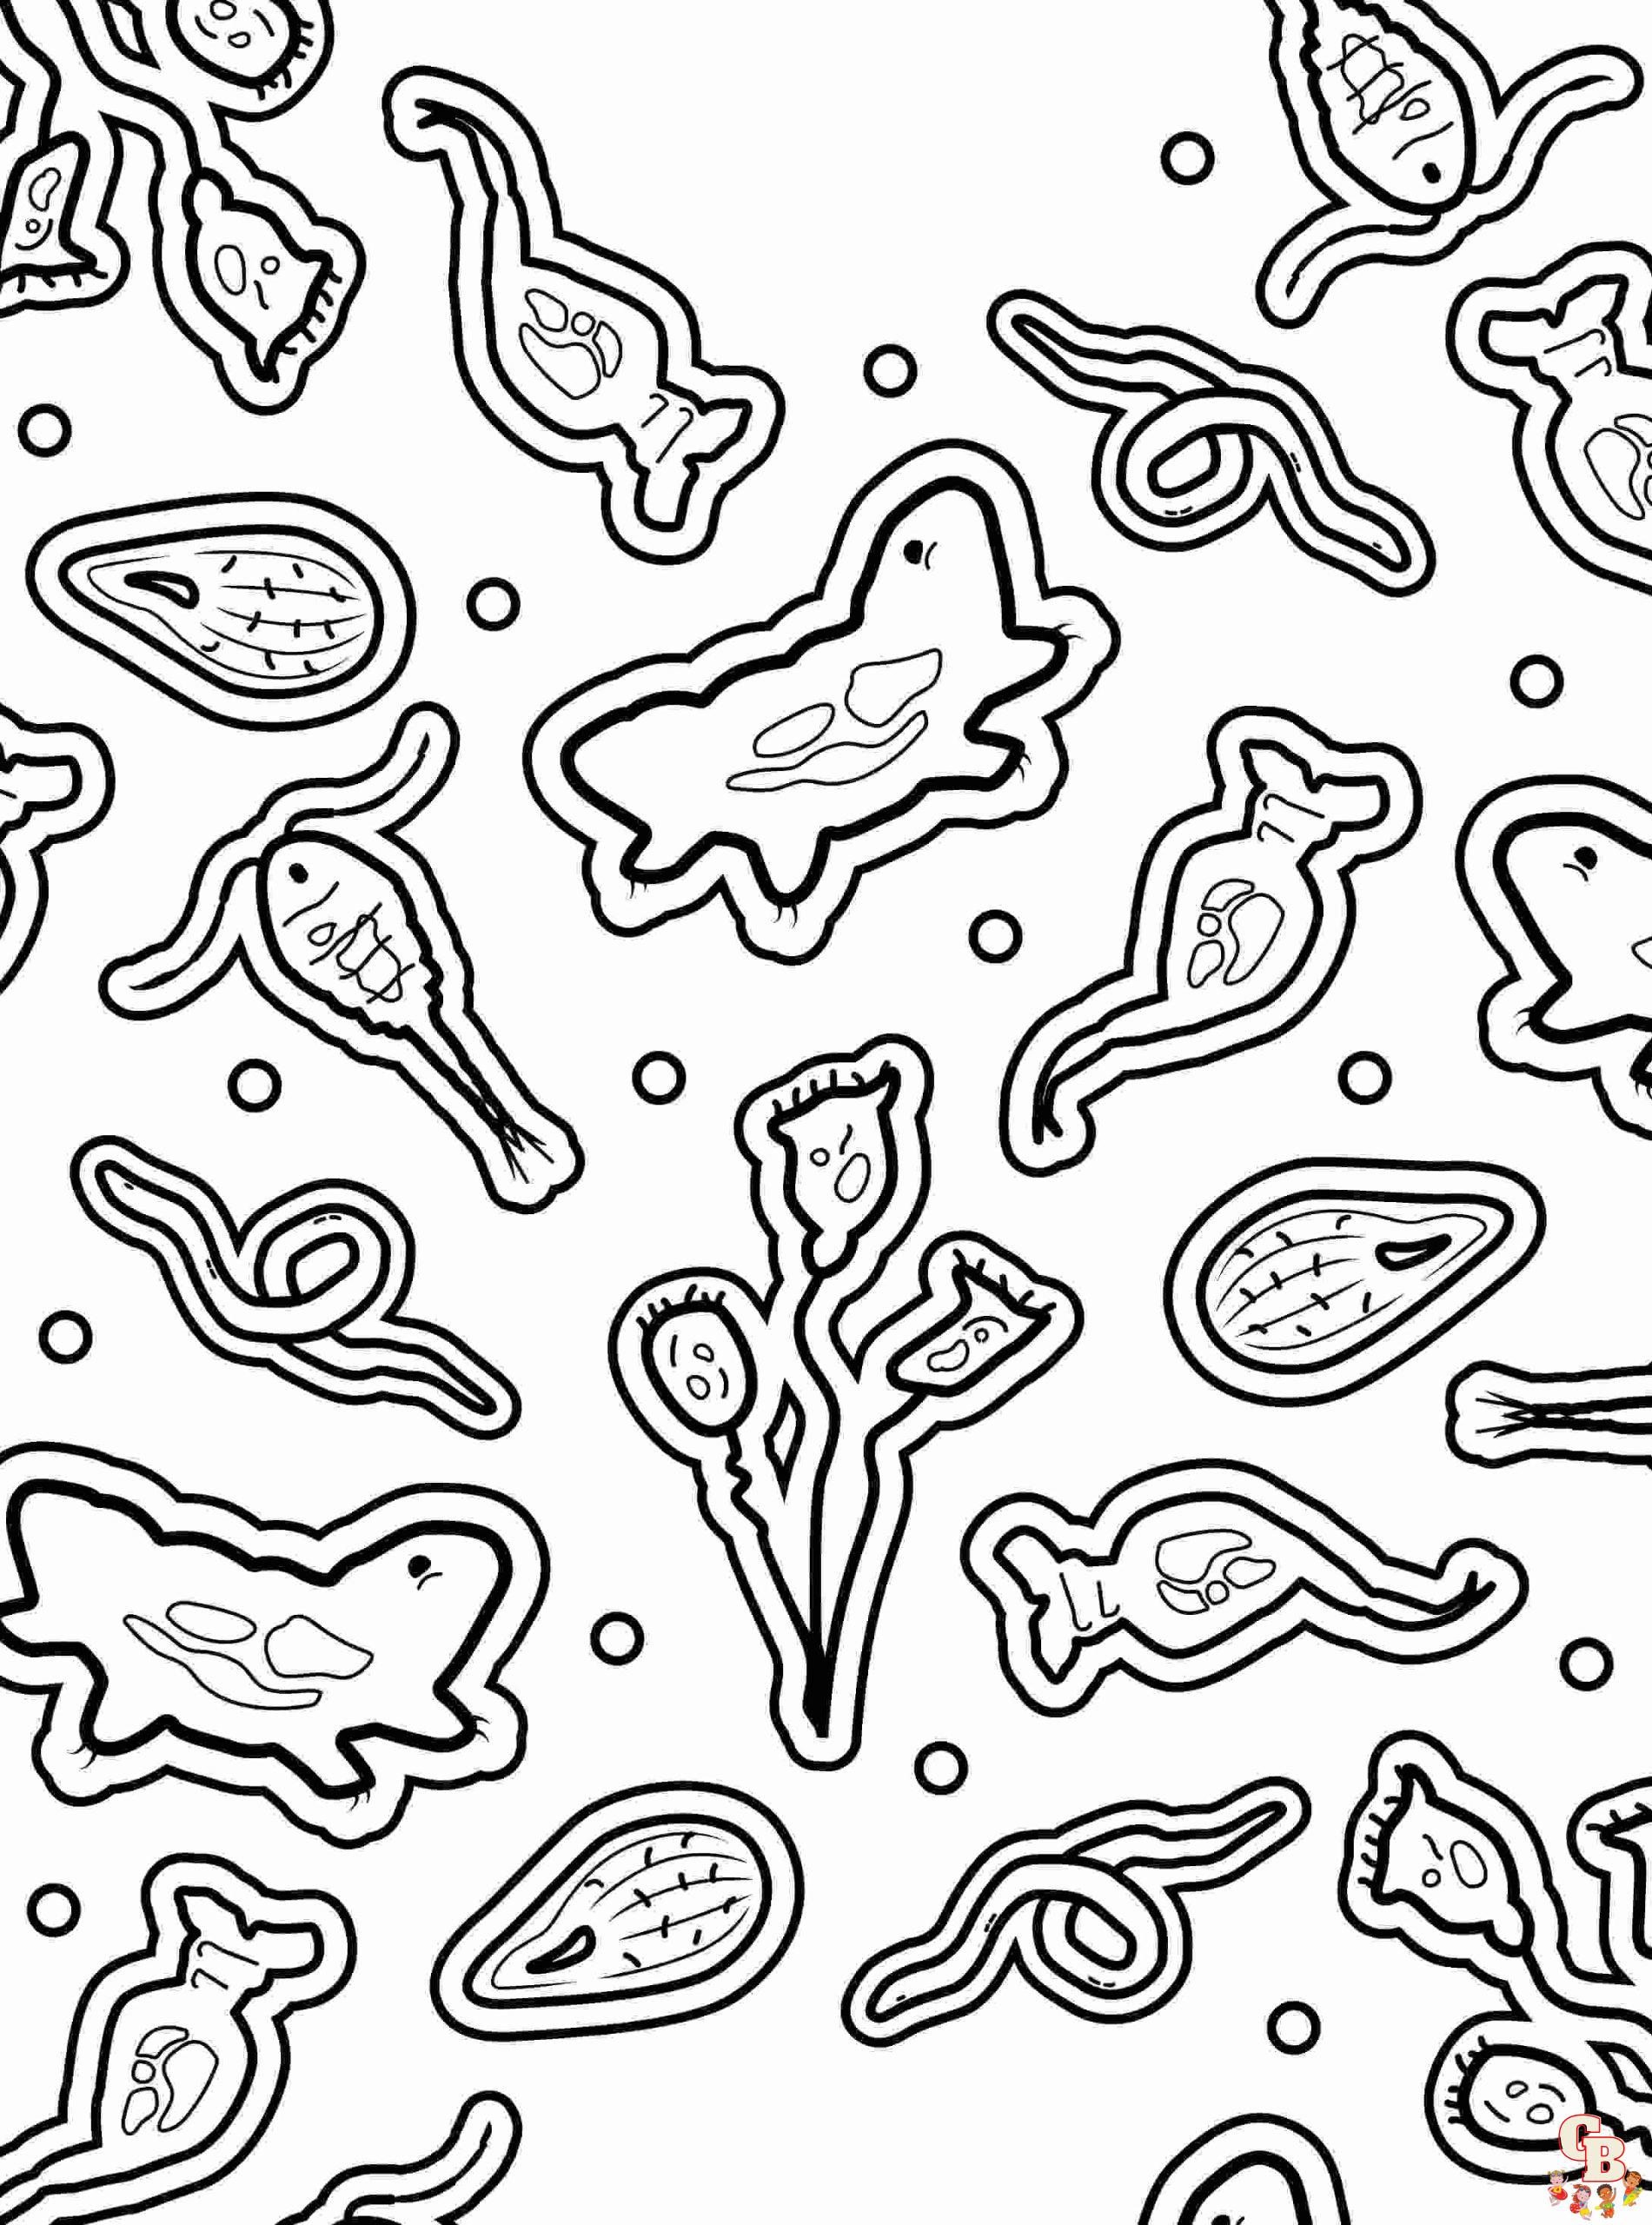 Free Biology coloring pages for kids